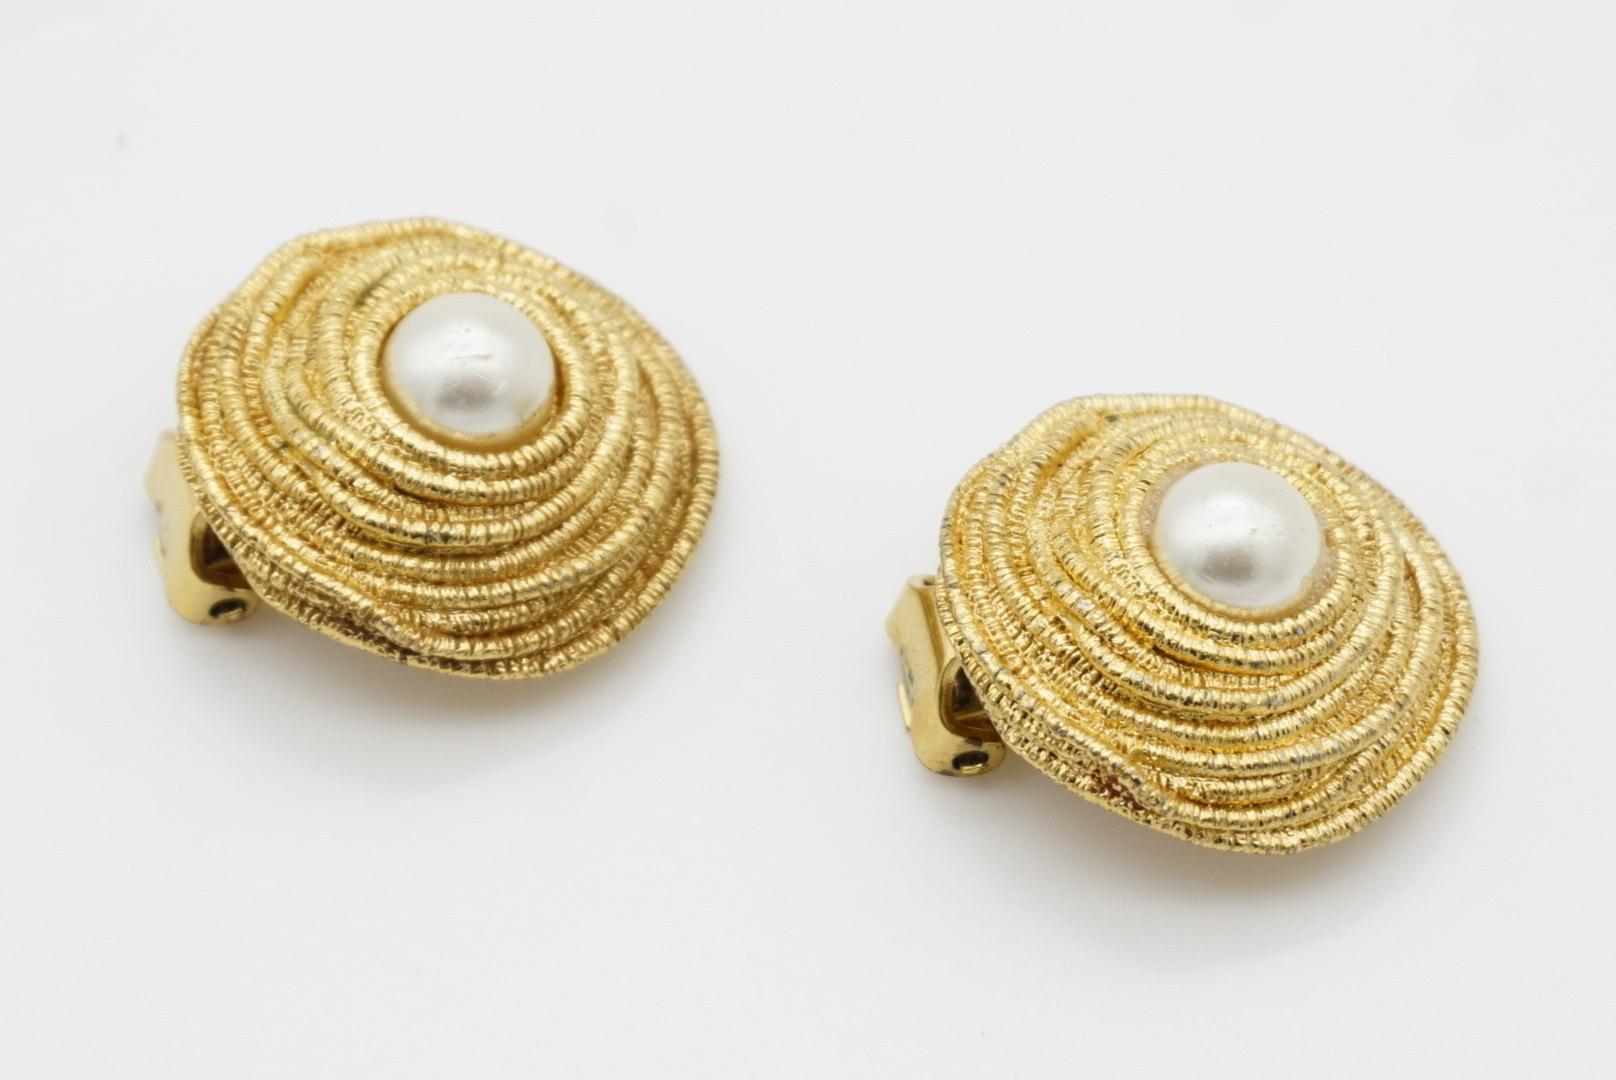 Christian Dior Vintage 1980s Irregular Spiral Round Circle Pearl Clip Earrings For Sale 8